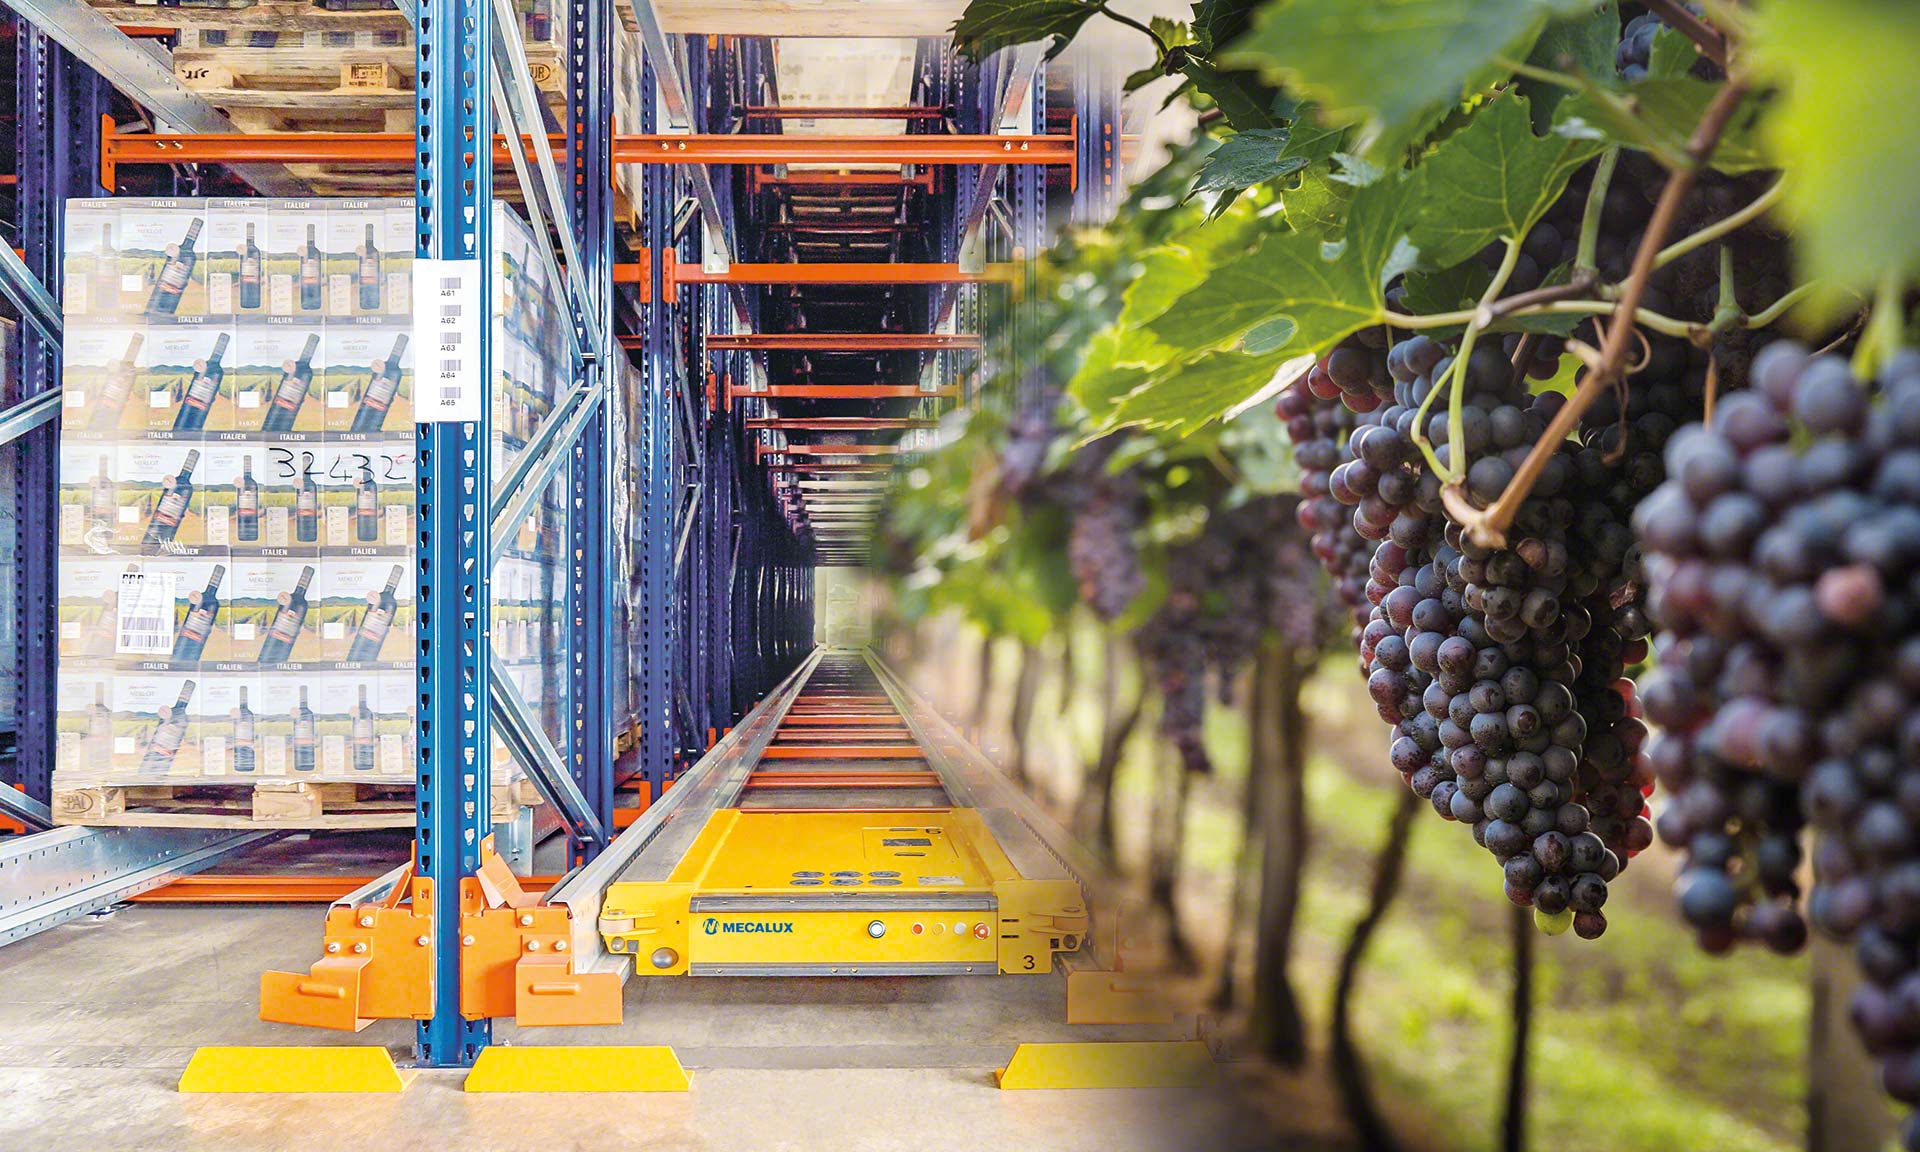 Automation increases efficiency and safety in wine warehousing